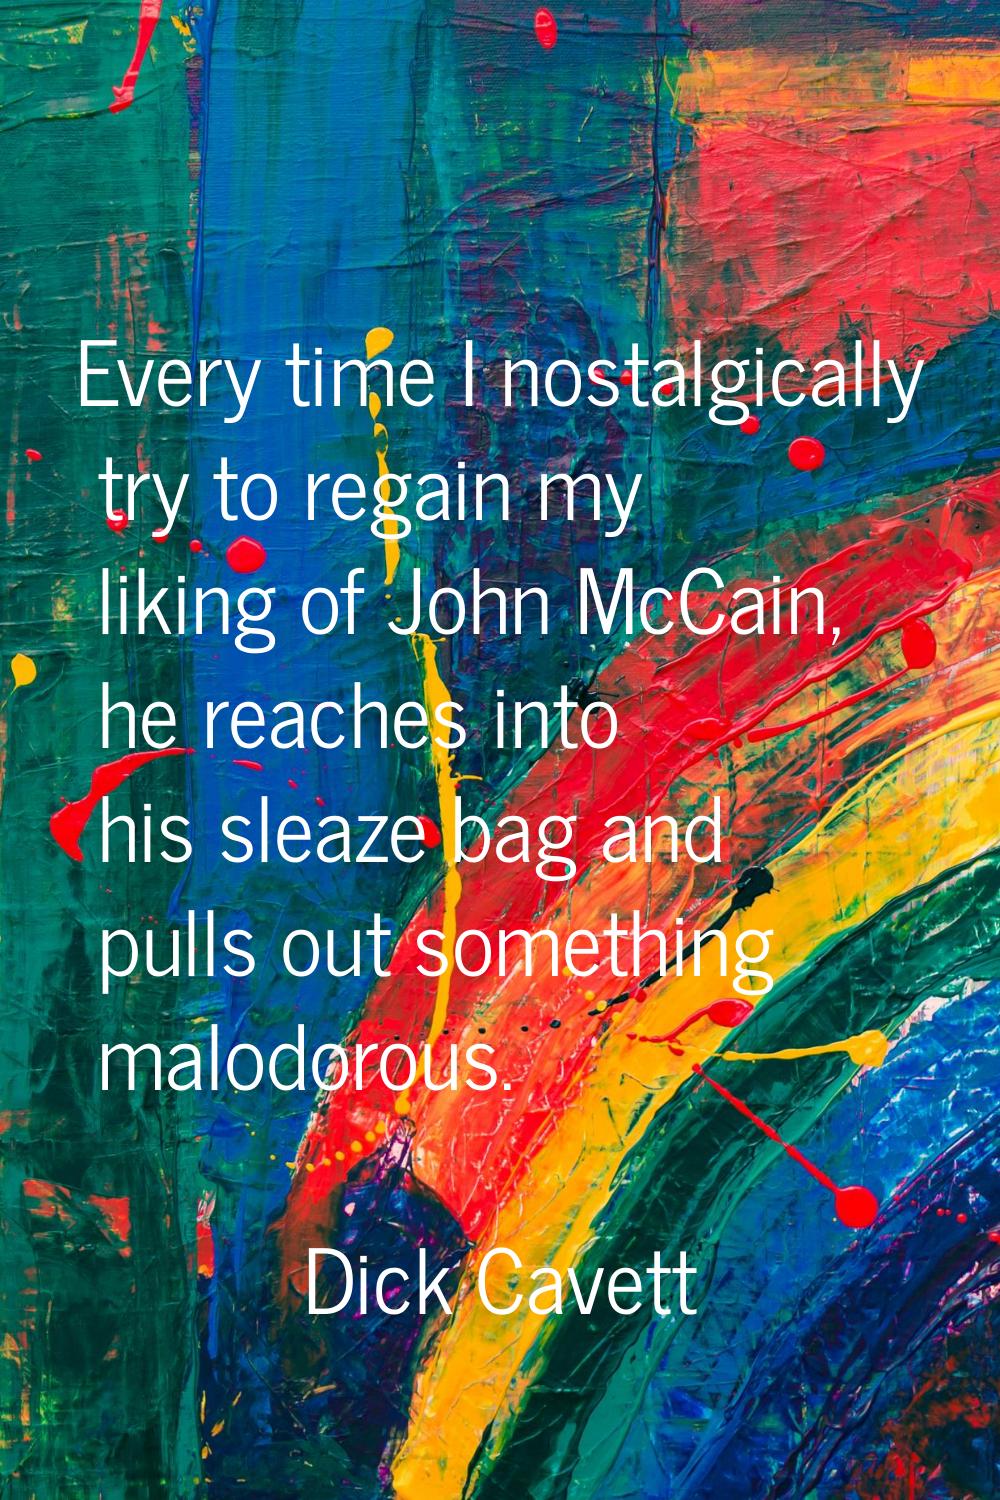 Every time I nostalgically try to regain my liking of John McCain, he reaches into his sleaze bag a